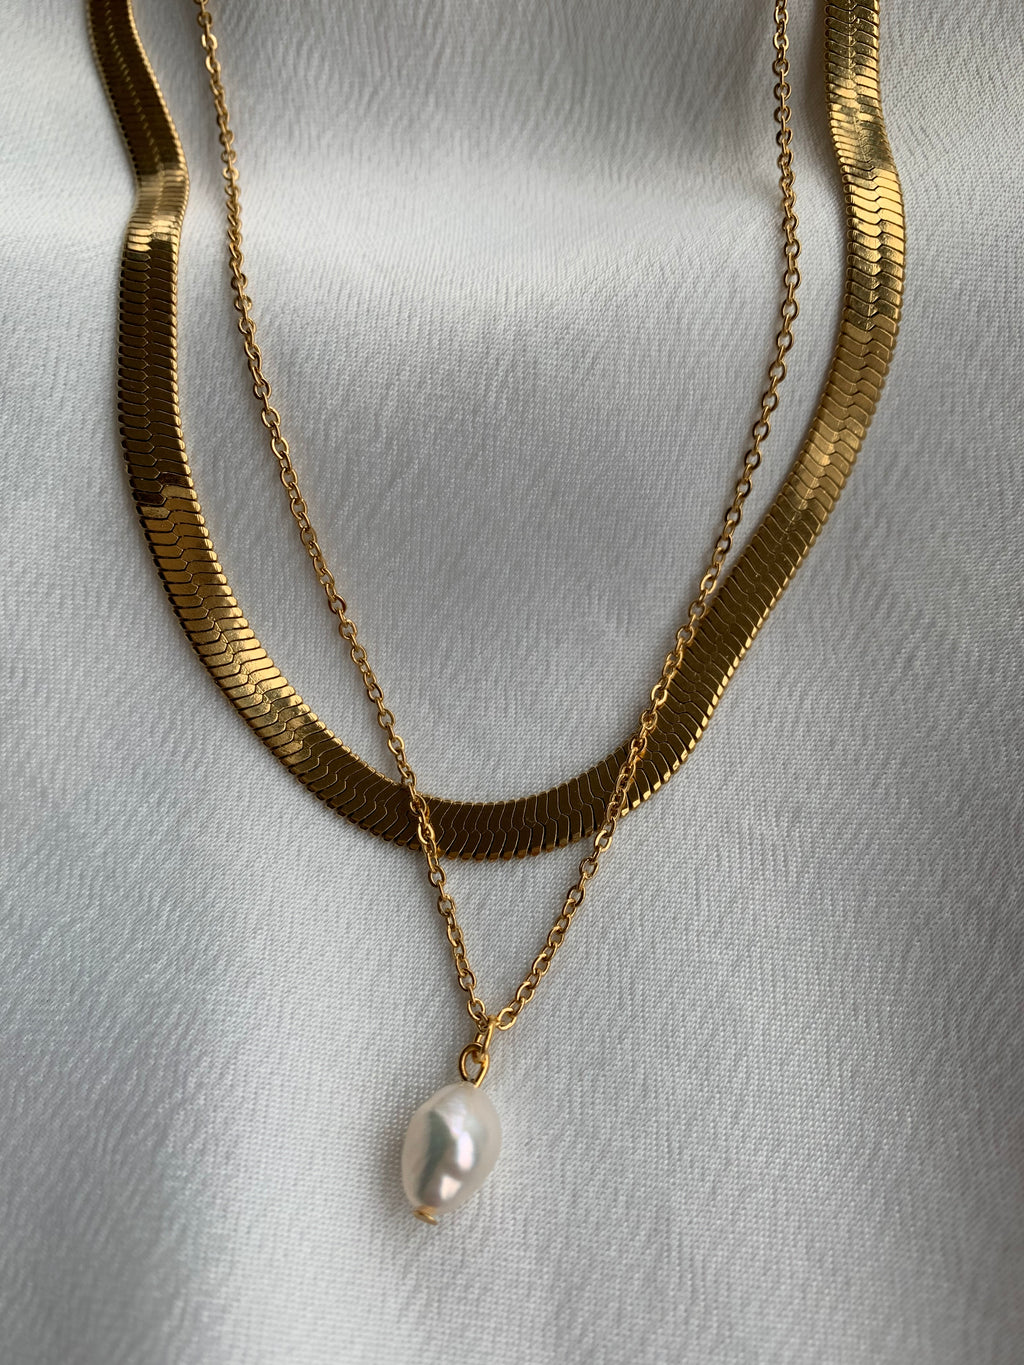 Add a beautiful pearl drop to your necklace stack! 14K Gold Plated Freshwater Pearl Tarnish Resistant Hypoallergenic 45cm, adjustable Choice of large or small Freshwater Pearl | Easy Pearl Drop Necklace | Non-tarnish 14k Jewellery EasyClubCo